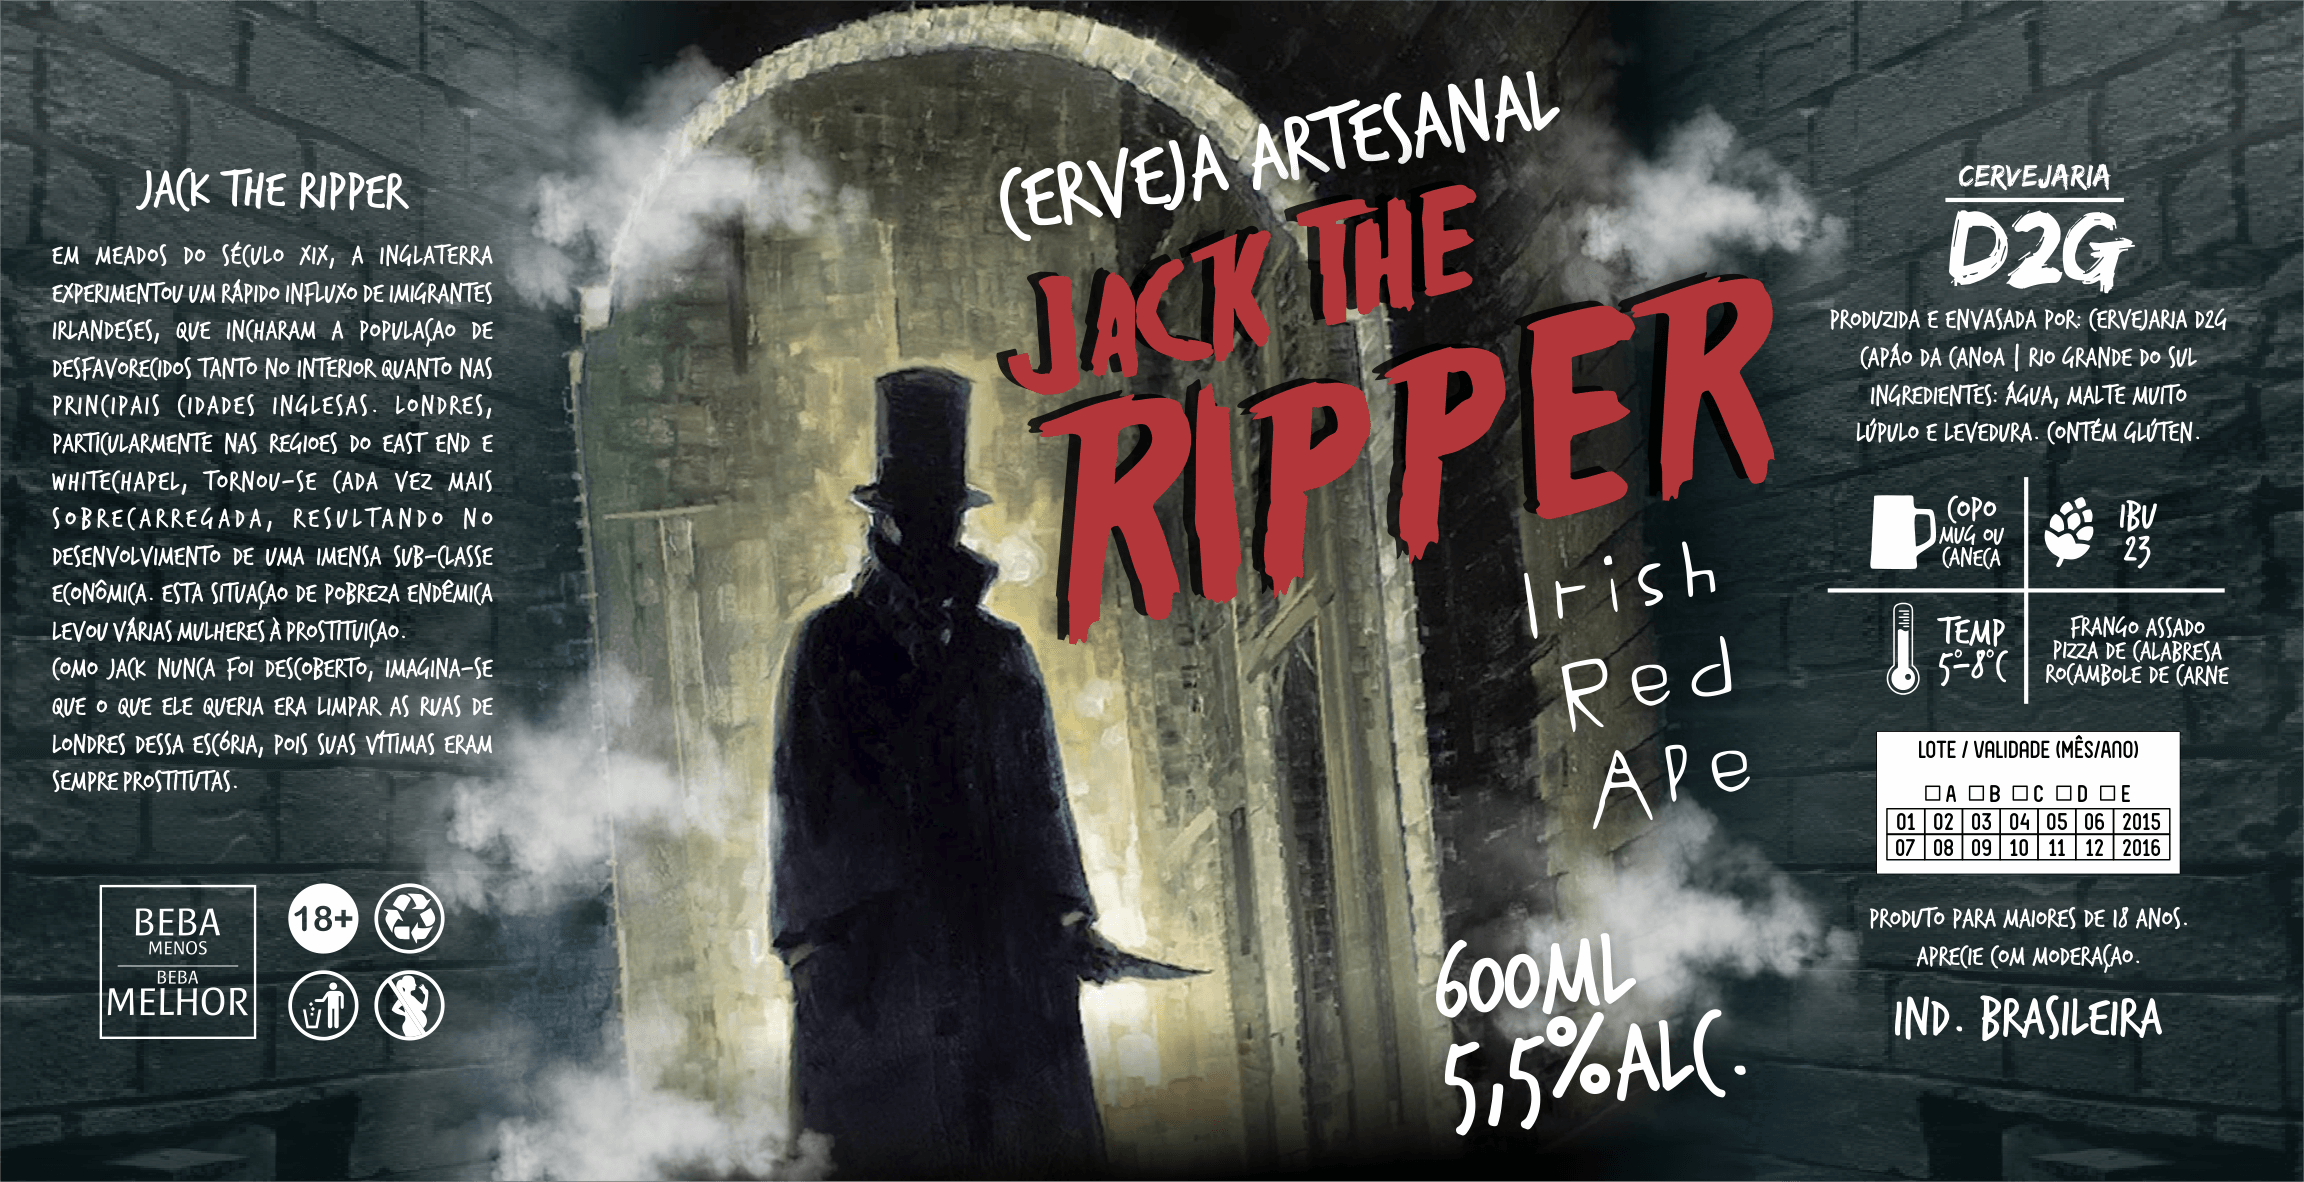 IRA - Jack The Ripper.png